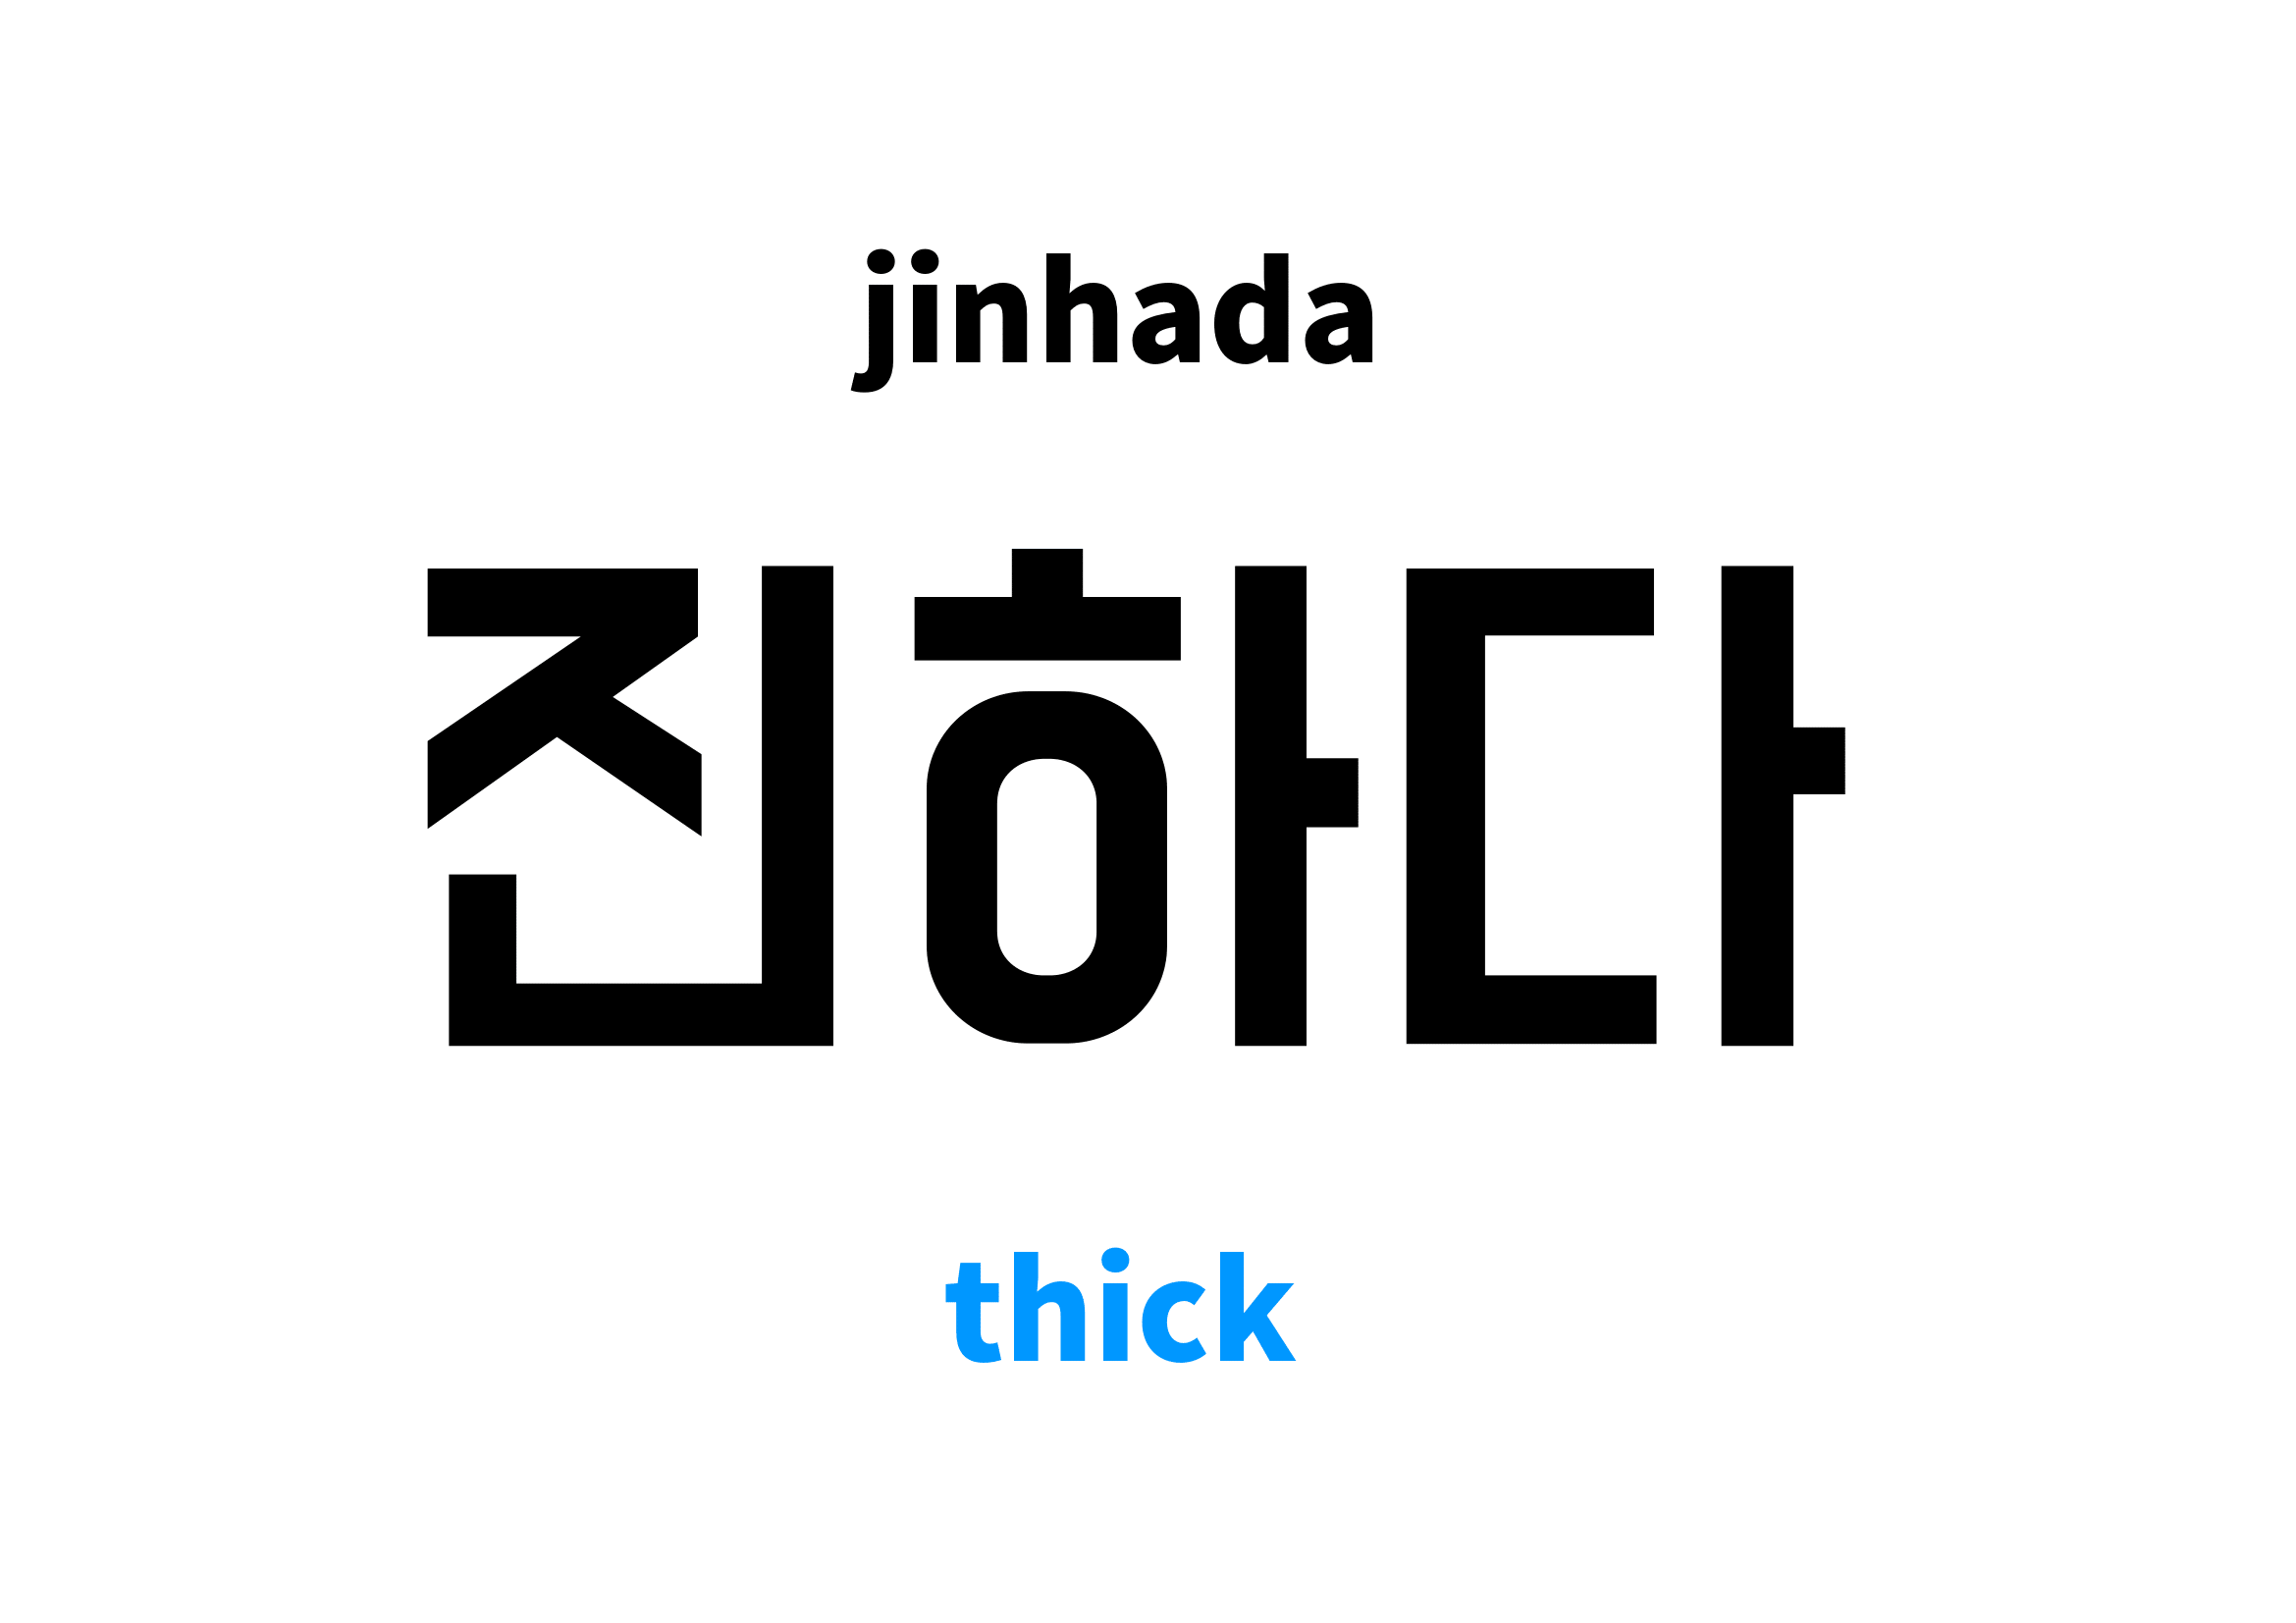 Thick in Korean, 진하다 meaning